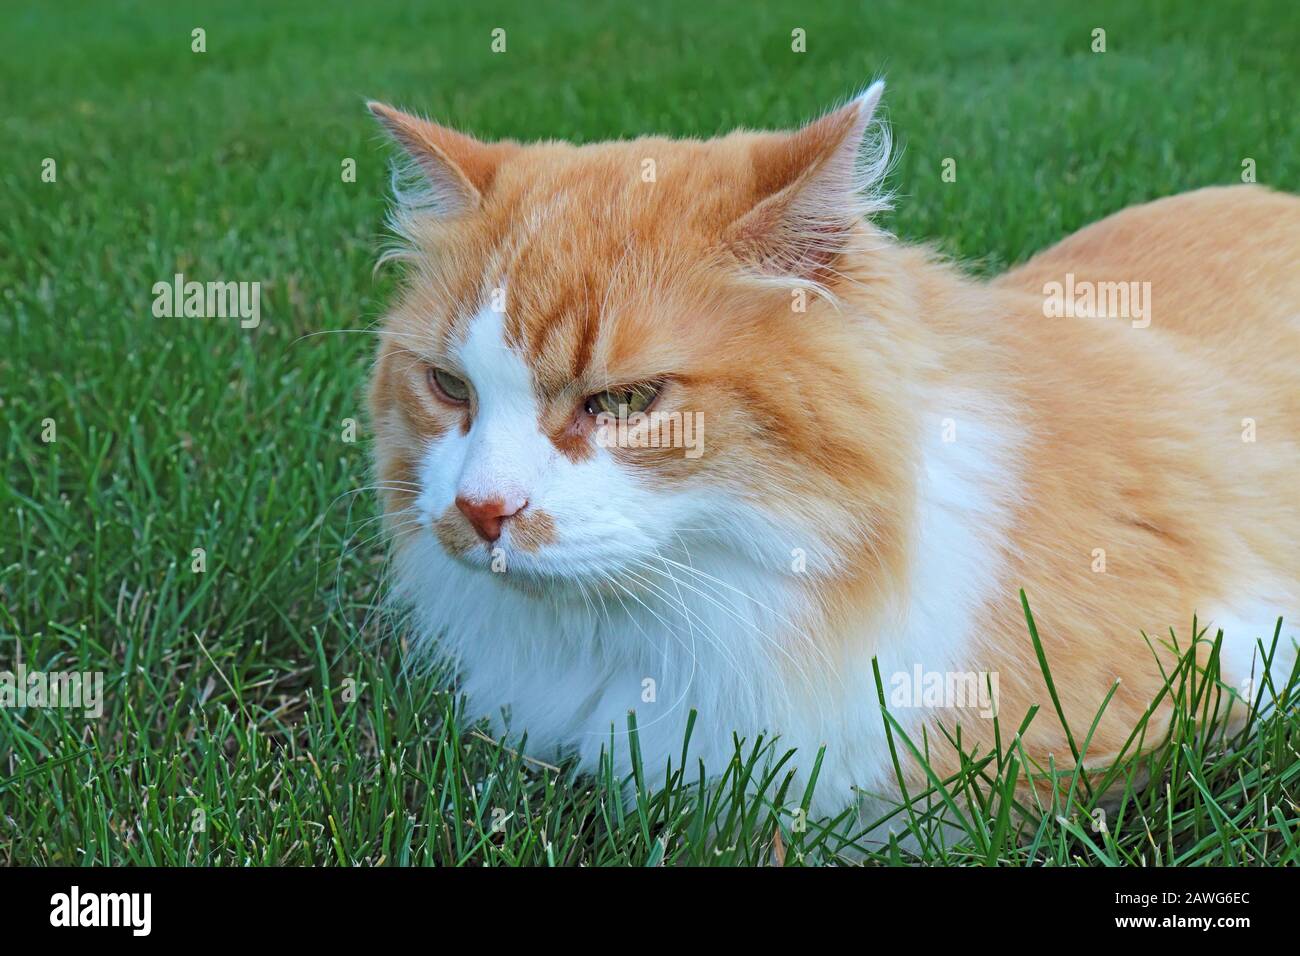 An orange and white domestic longhair cat (Felis catus) relaxing in a lawn of green grass Stock Photo